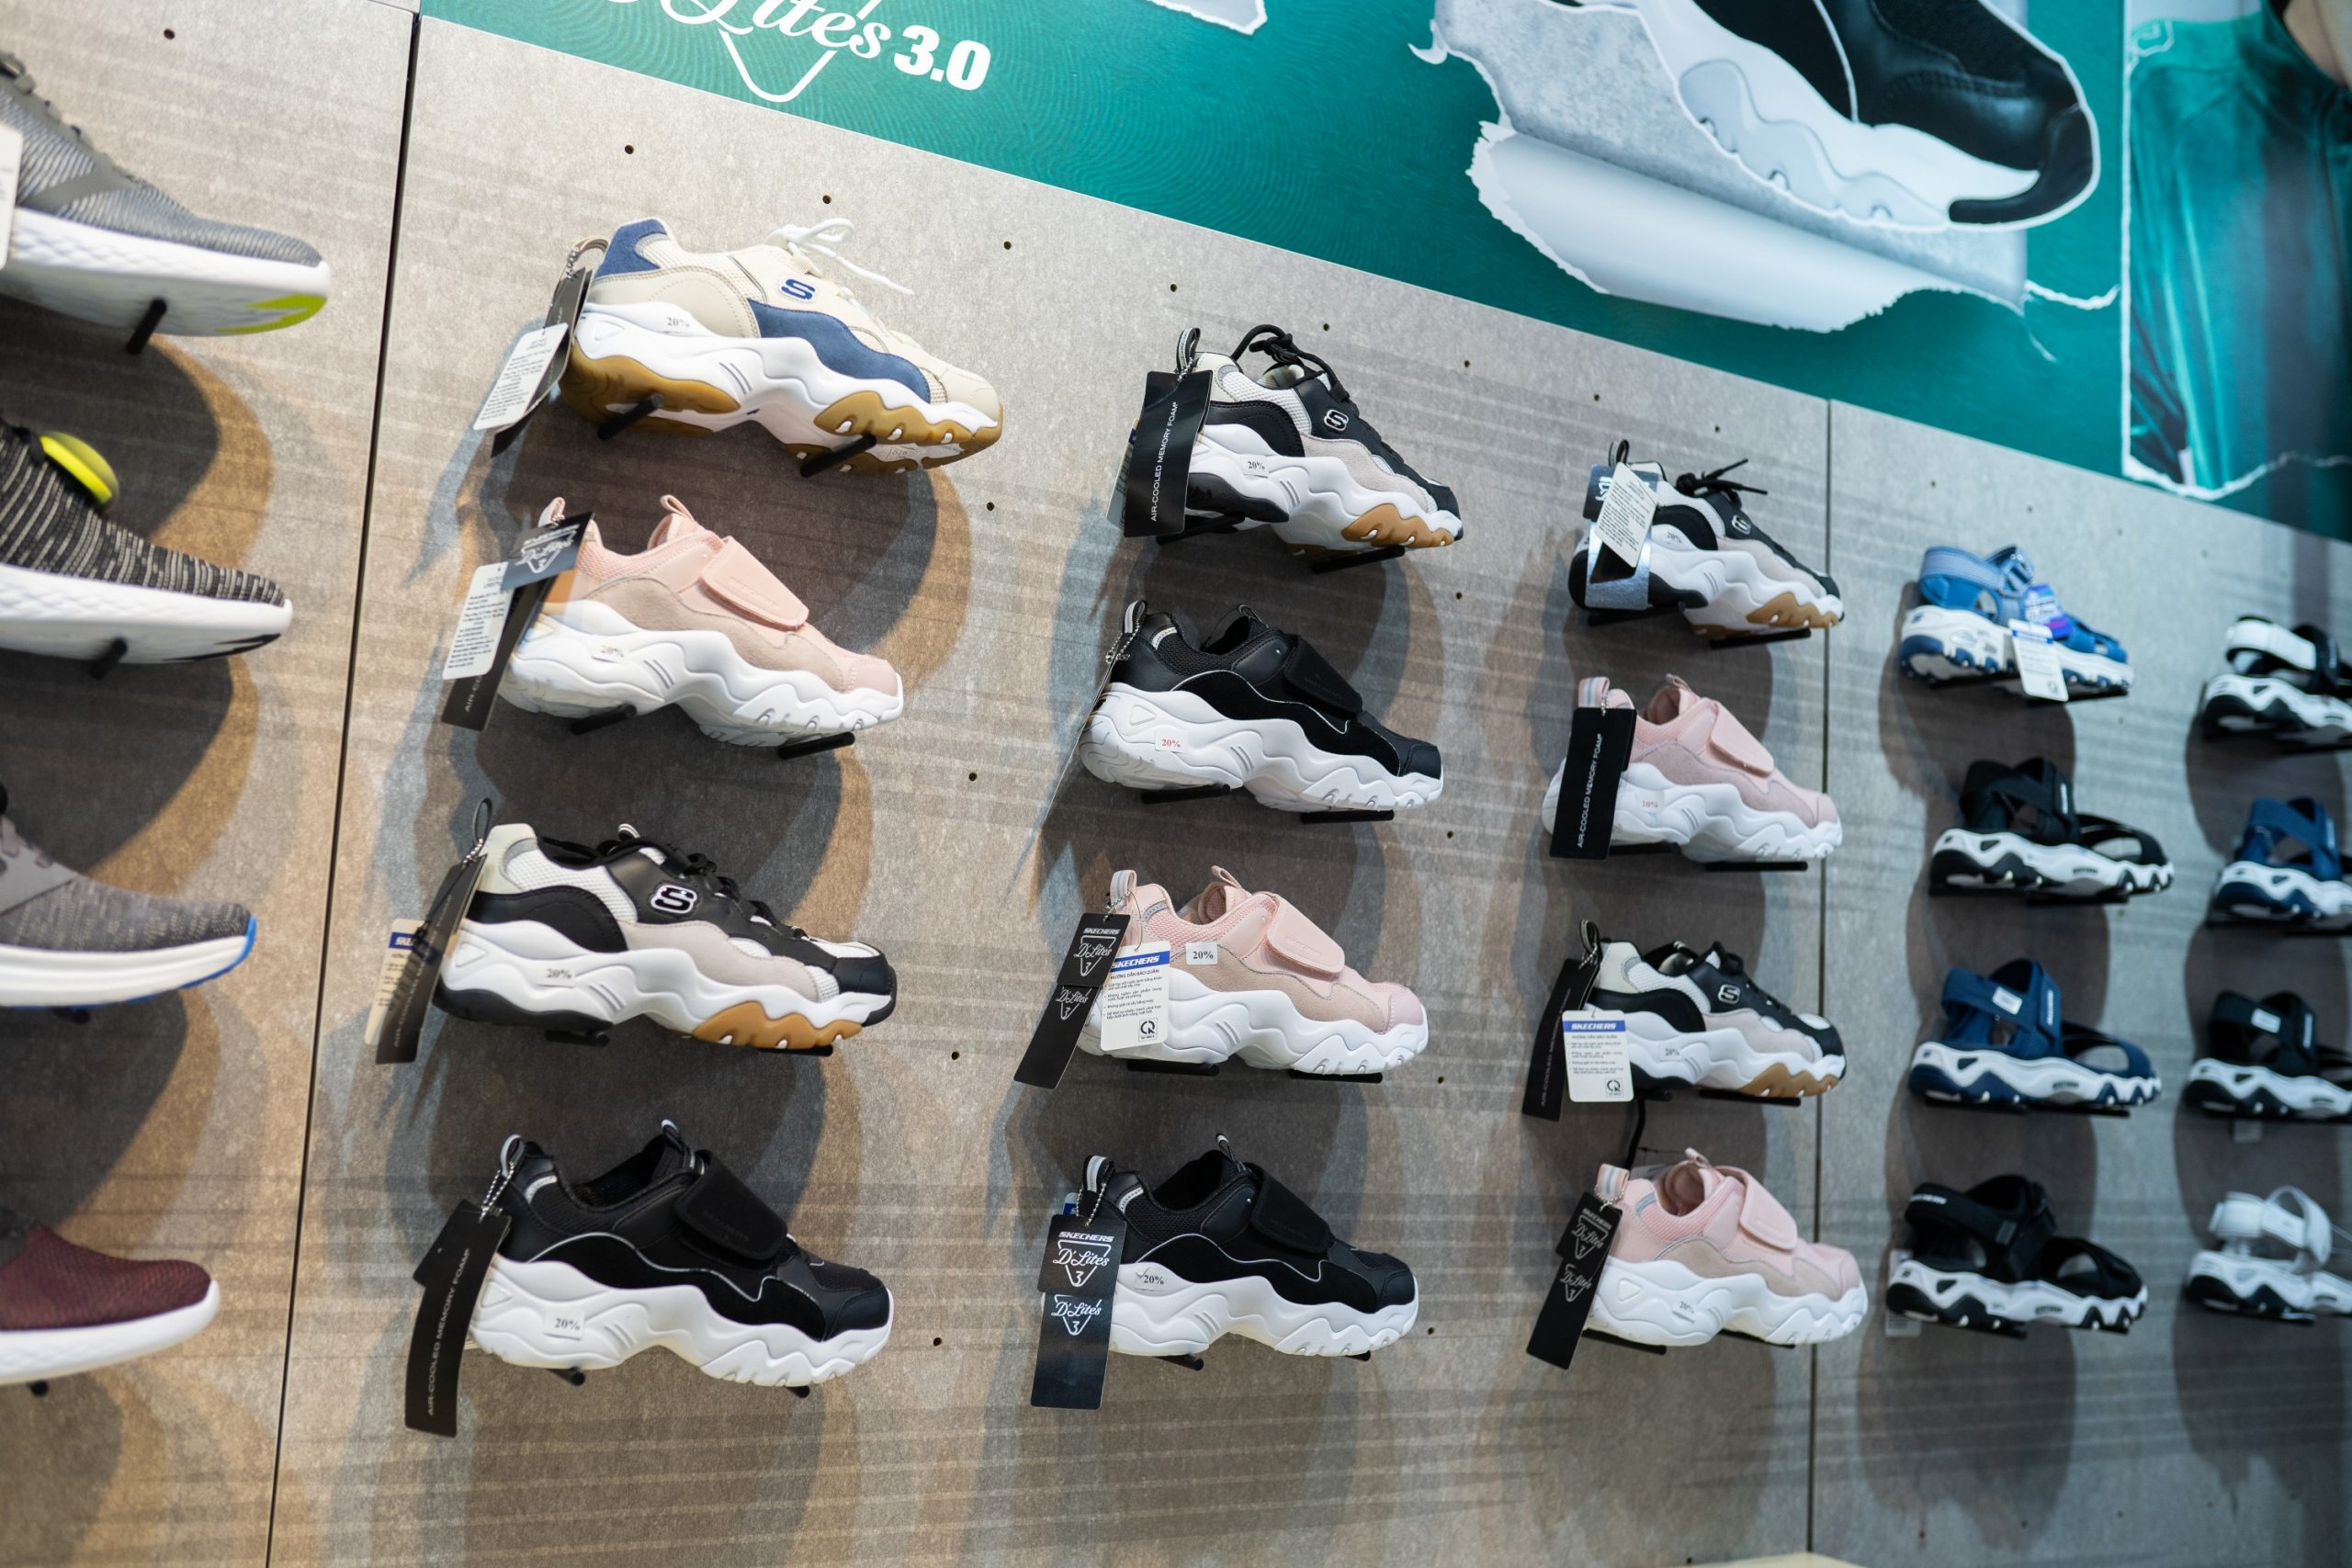 Skechers - Welcome Viet Tien's newest concept store in Ho Chi Minh City